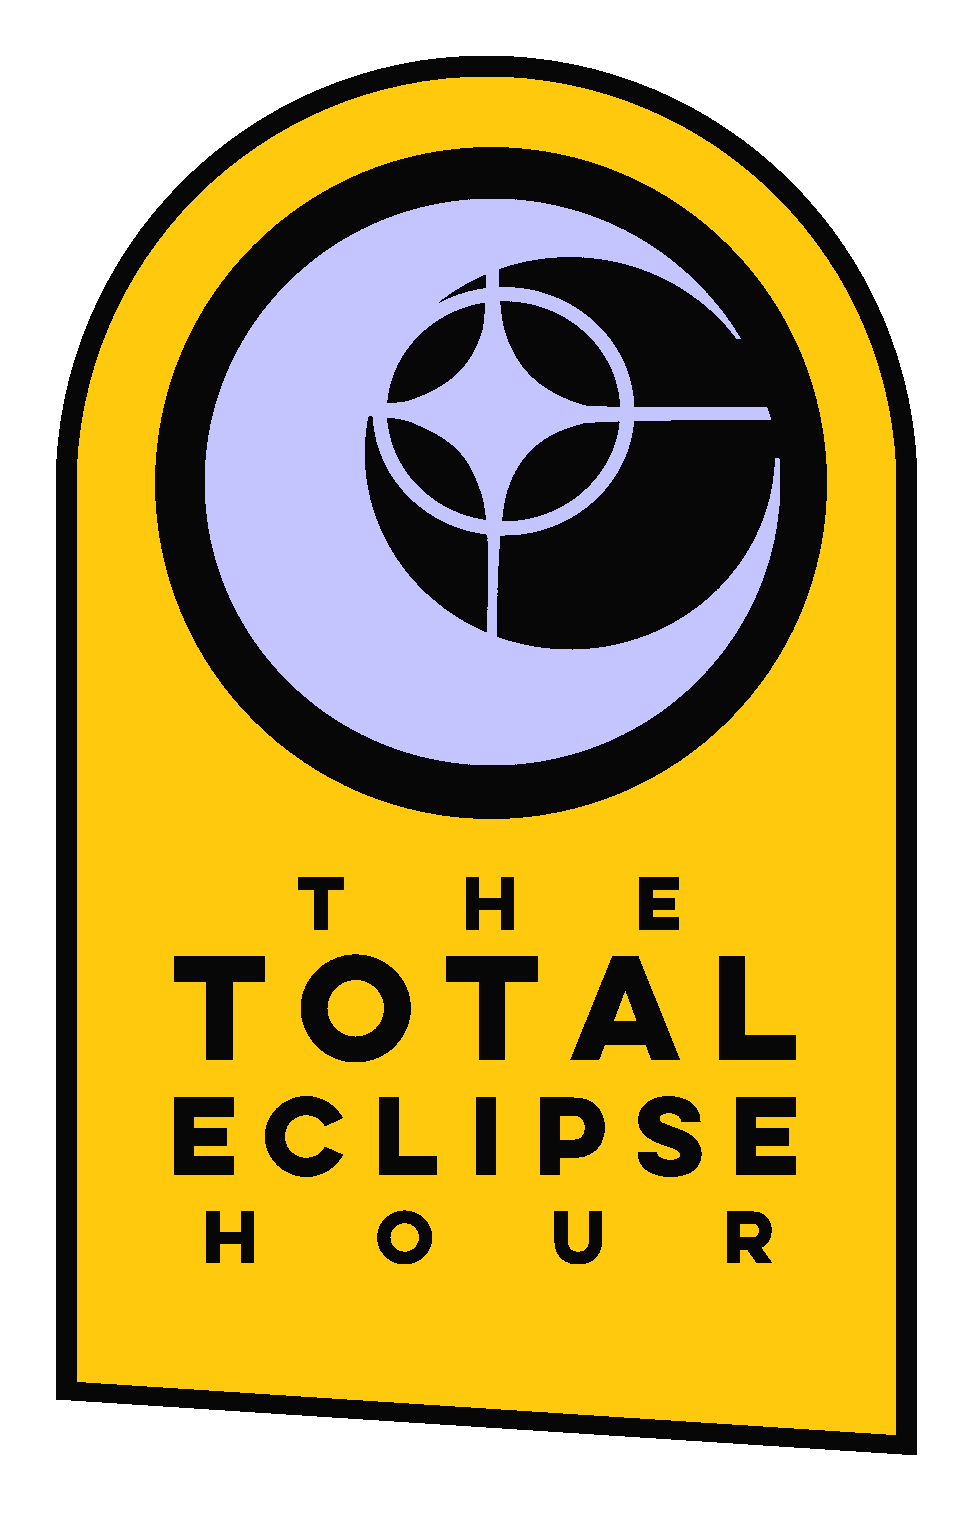 abcs-total-eclipse-hour-logo-png.748458